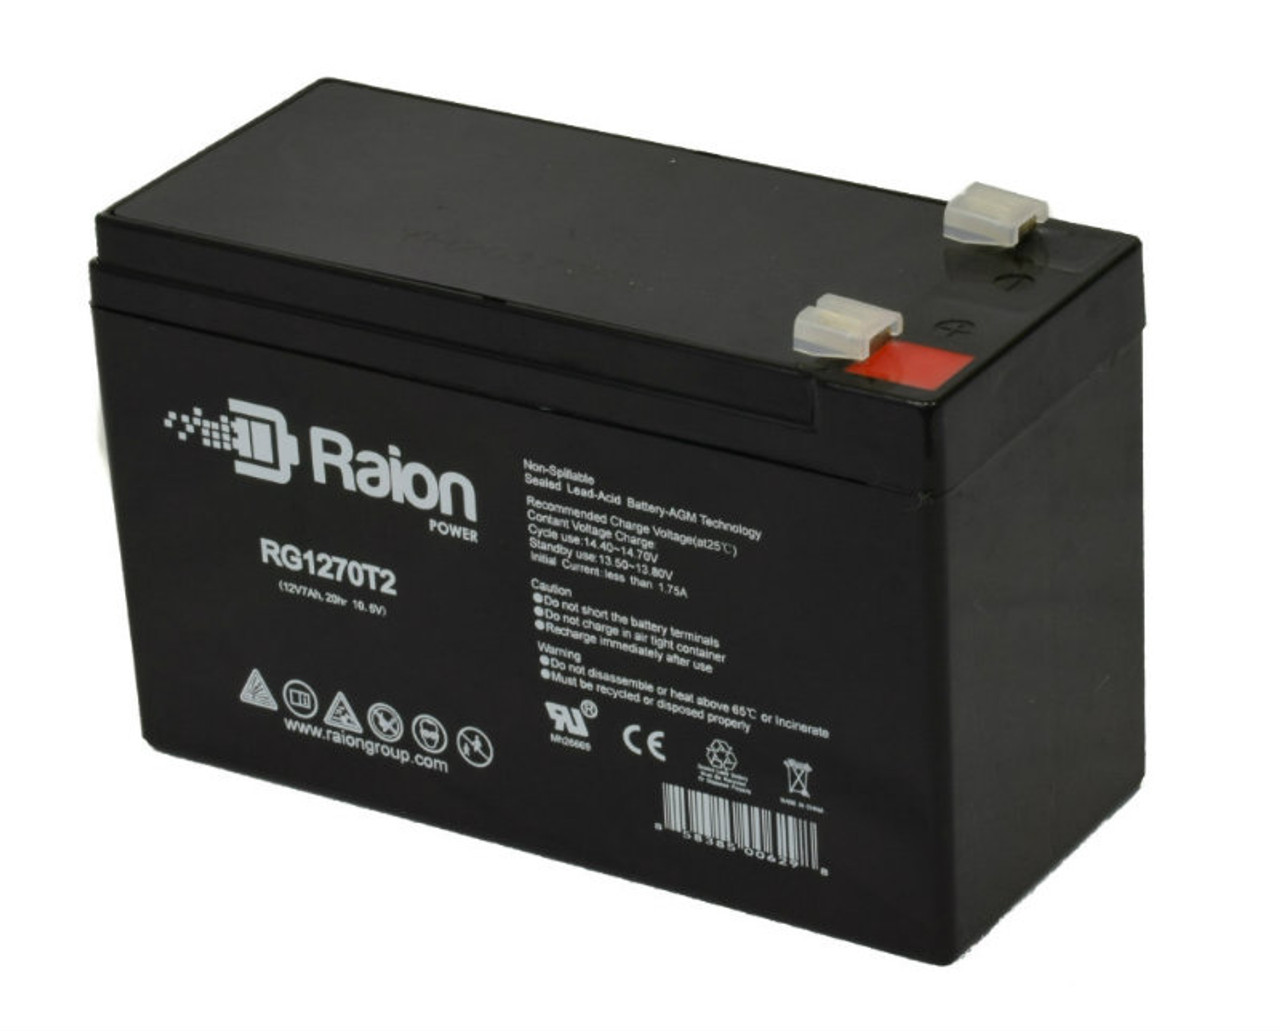 Raion Power RG1270T1 12V 7Ah Non-Spillable Replacement Battery for Leoch LP12-7.2 F1